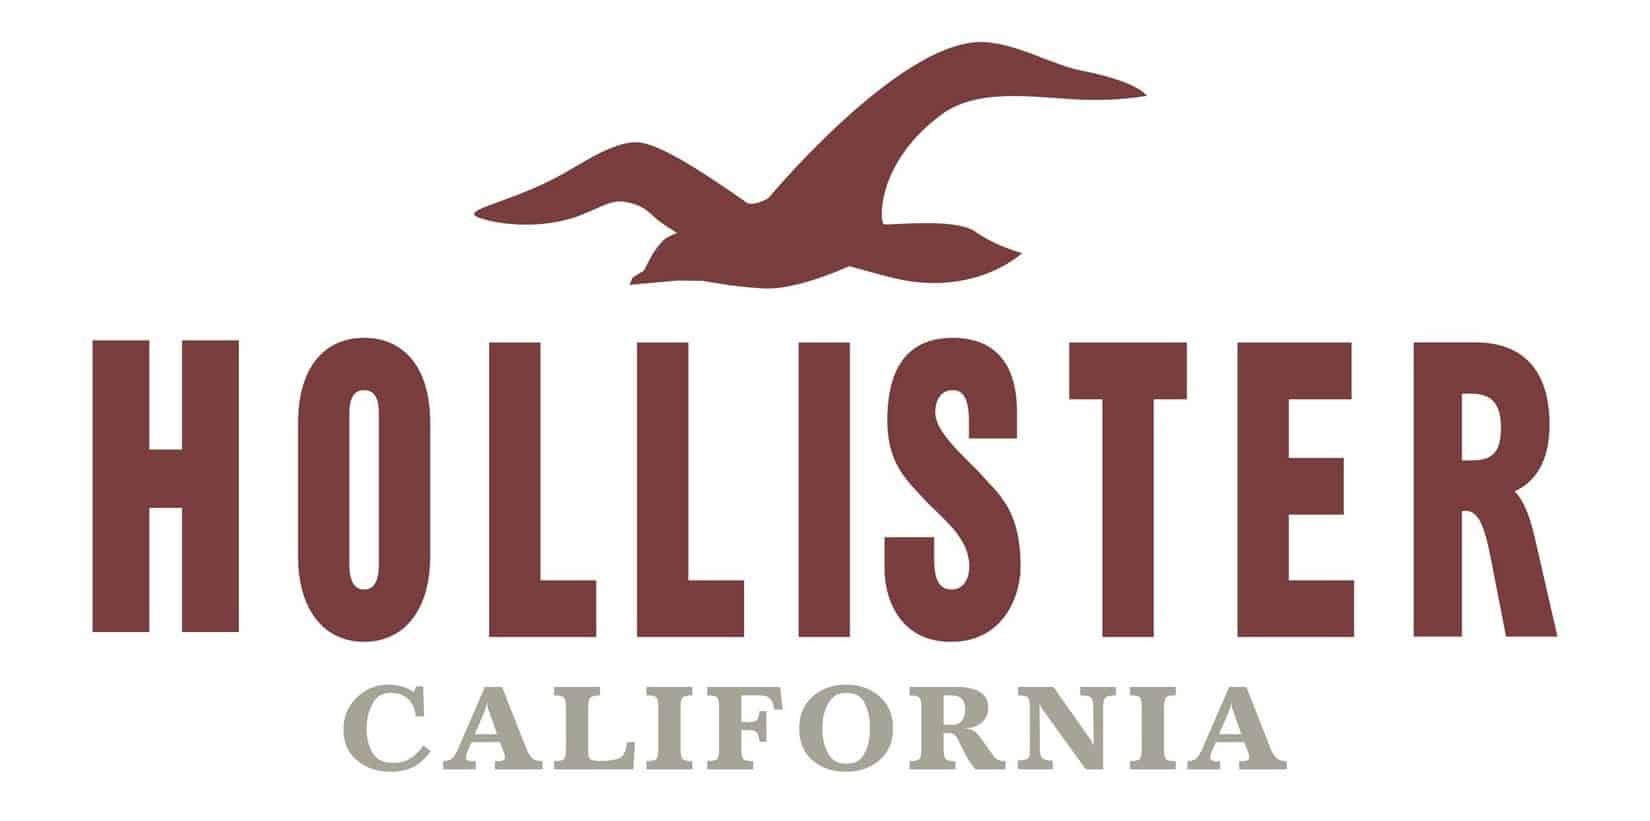 clothes like hollister